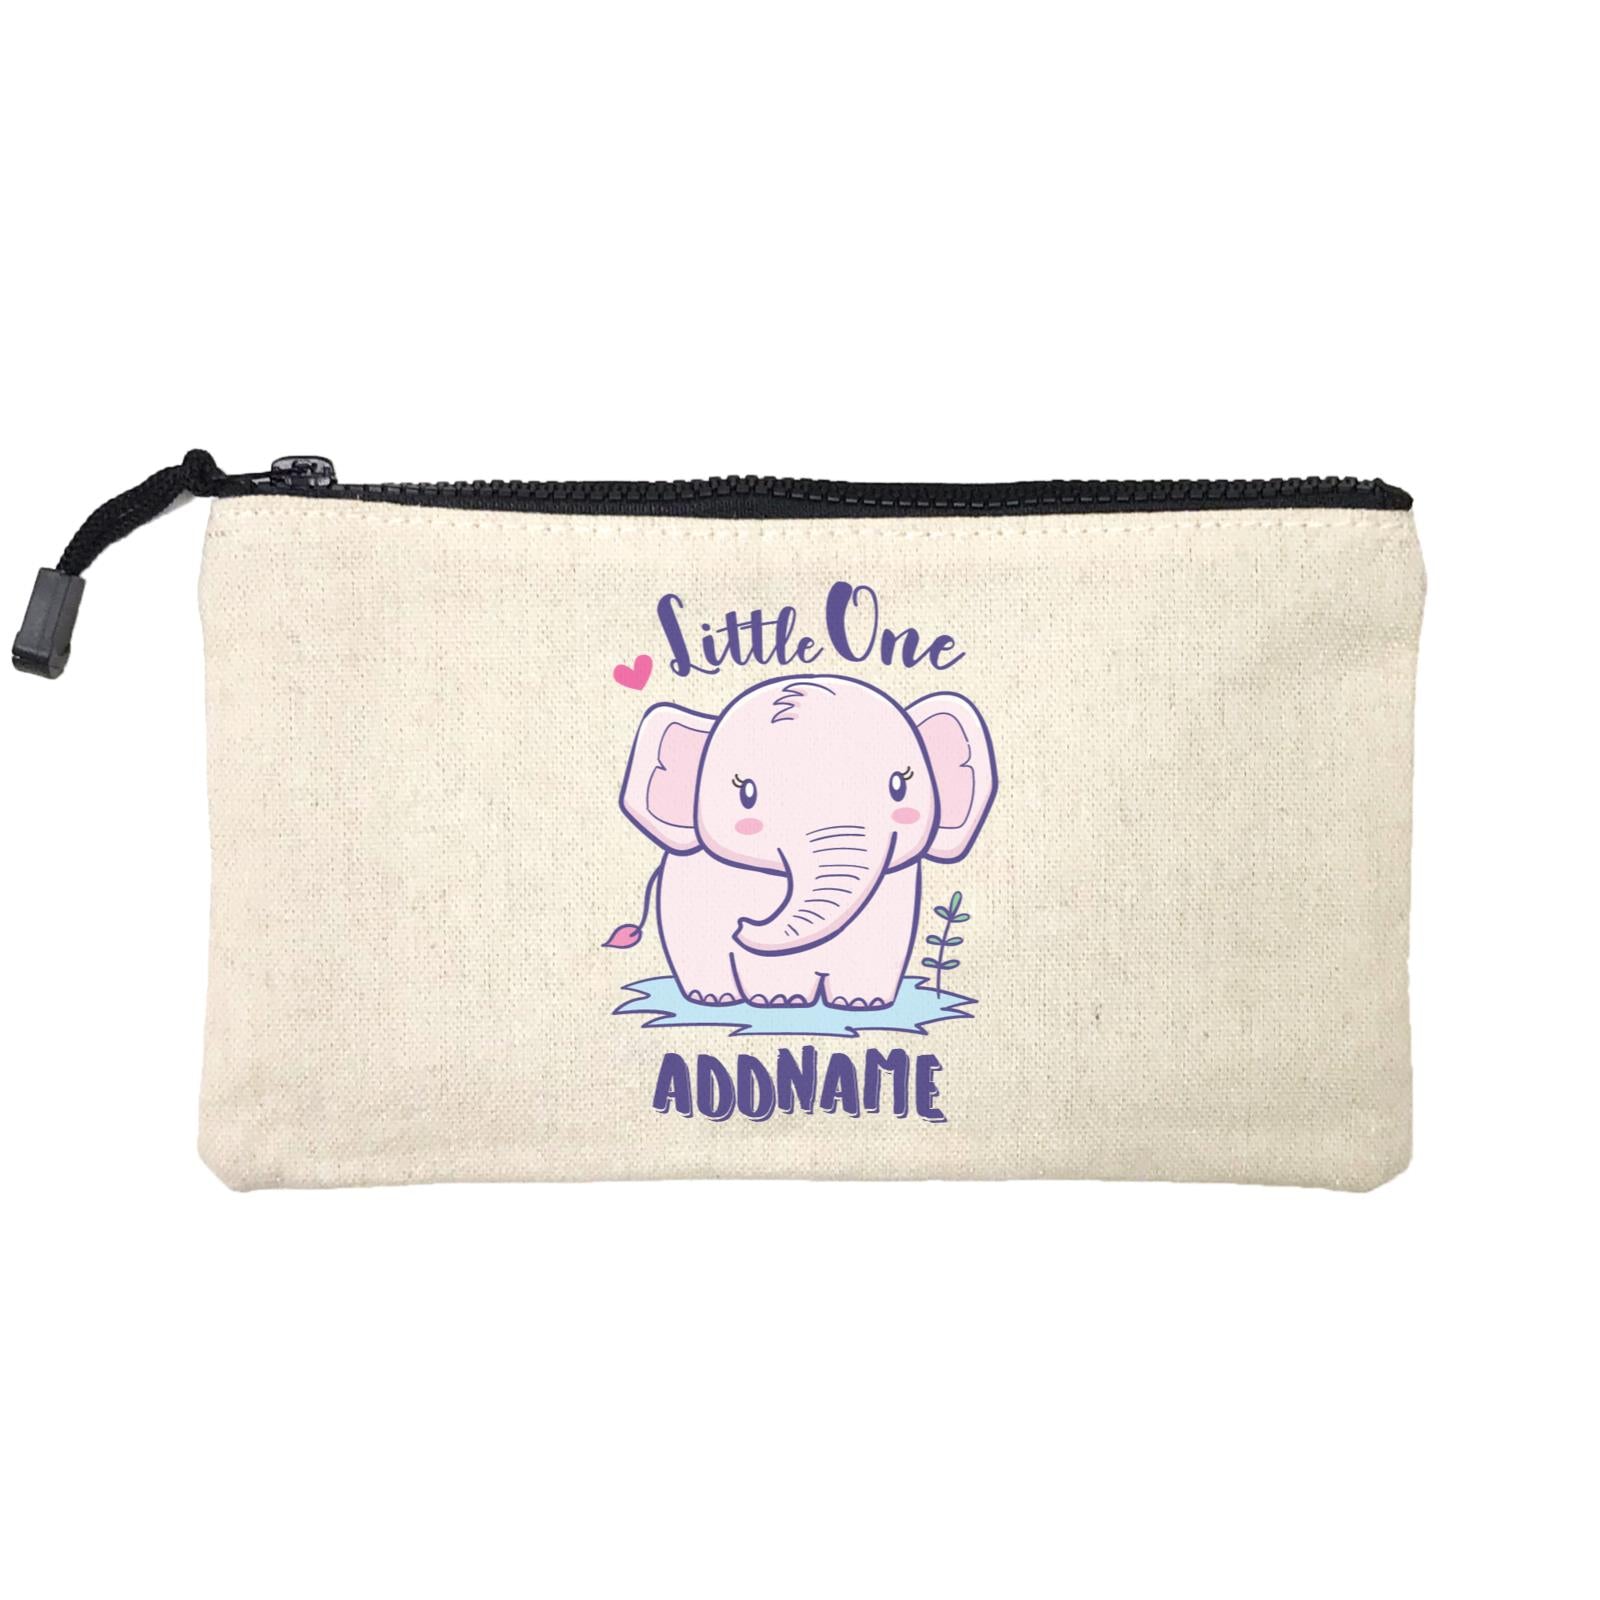 Cool Cute Animals Elephant Little One Addname Mini Accessories Stationery Pouch